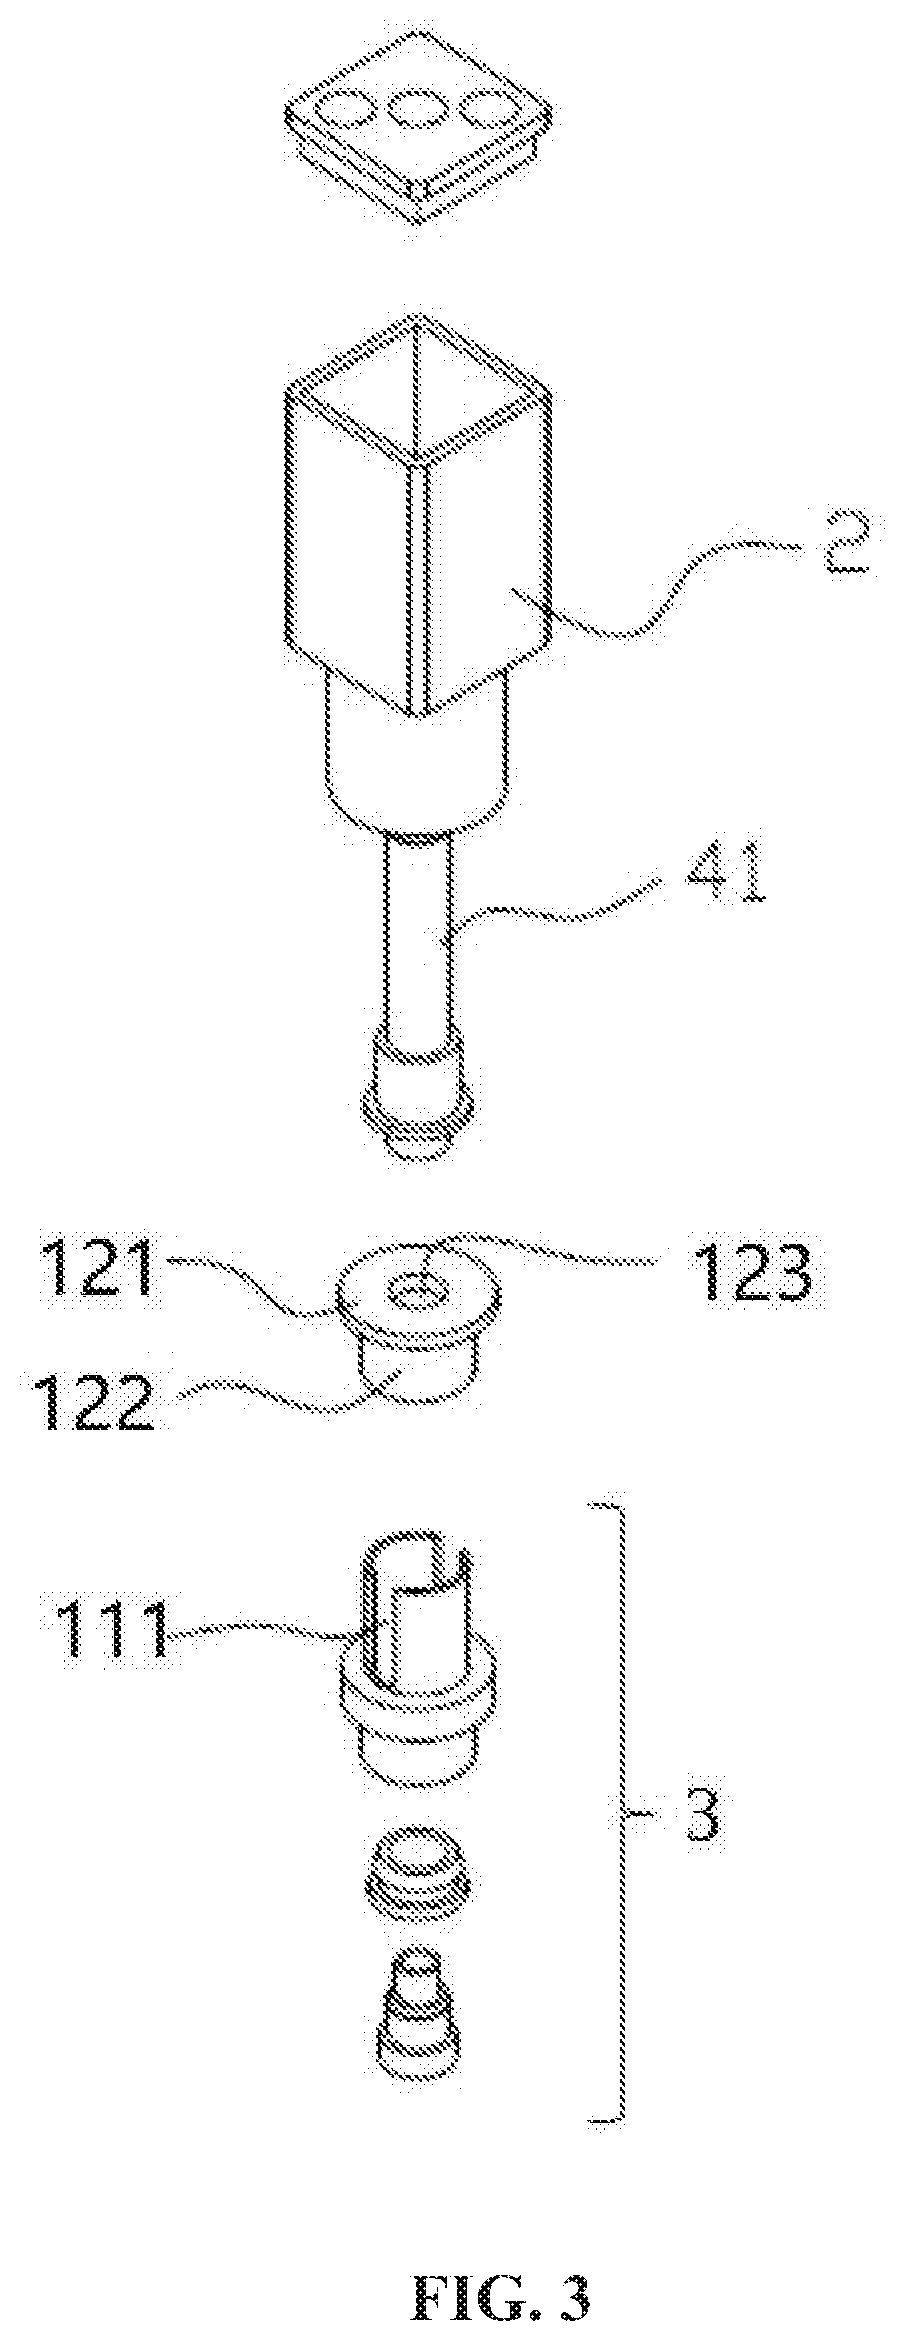 E-cigarette atomization device capable of controlling the supply of e-liquid by relative movement of components